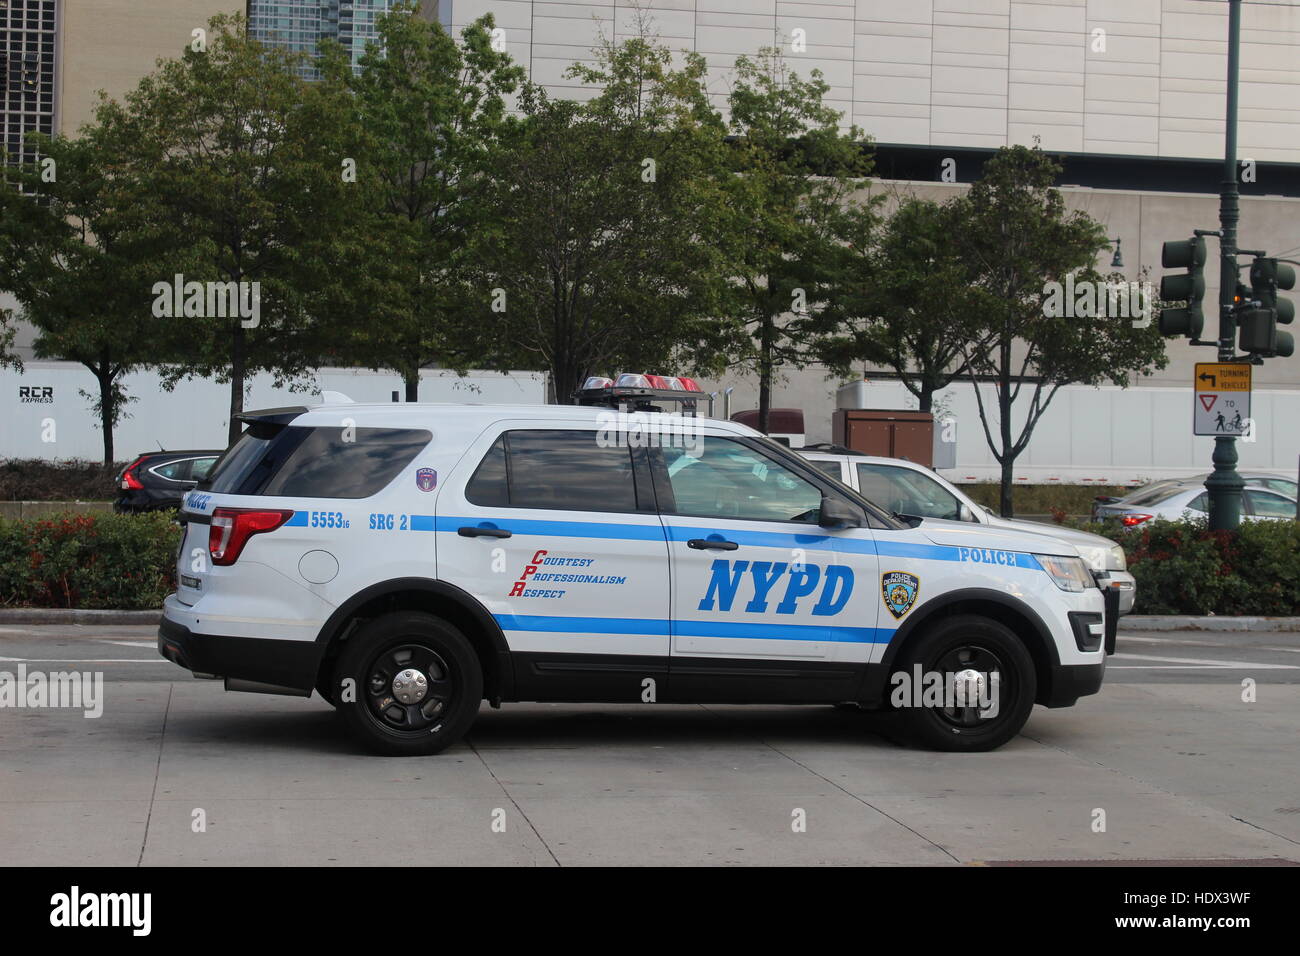 NYPD New York Police Department vehicle car NYC cop cops siren Stock Photo